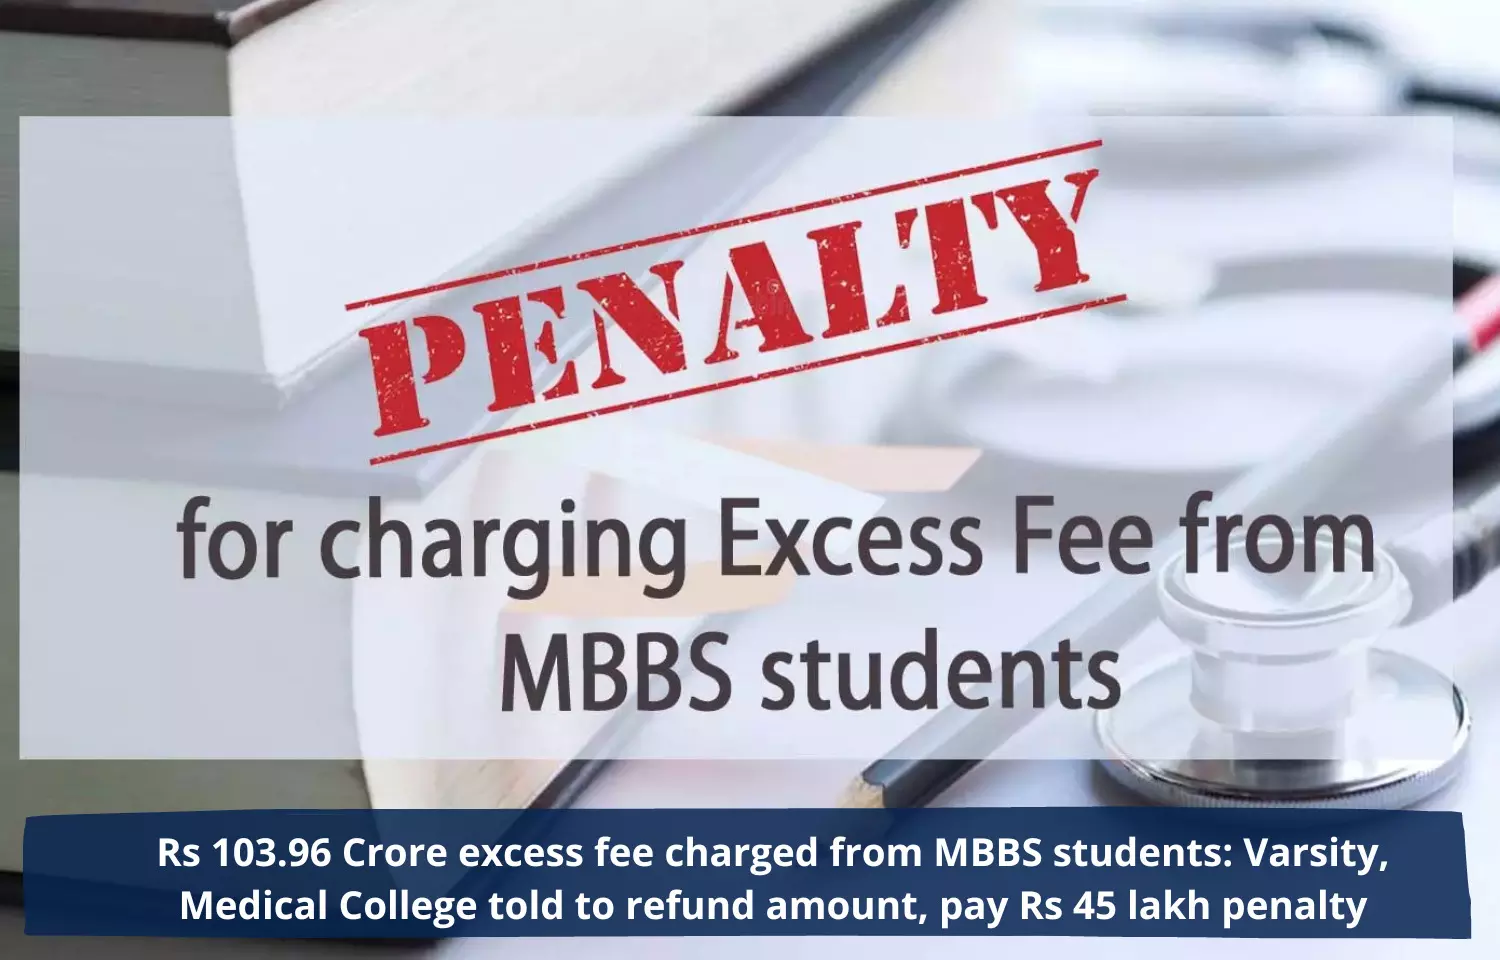 Rs 103.96 Crore excess fee charged from MBBS students: Varsity, Medical College told to refund amount, pay Rs 45 lakh penalty